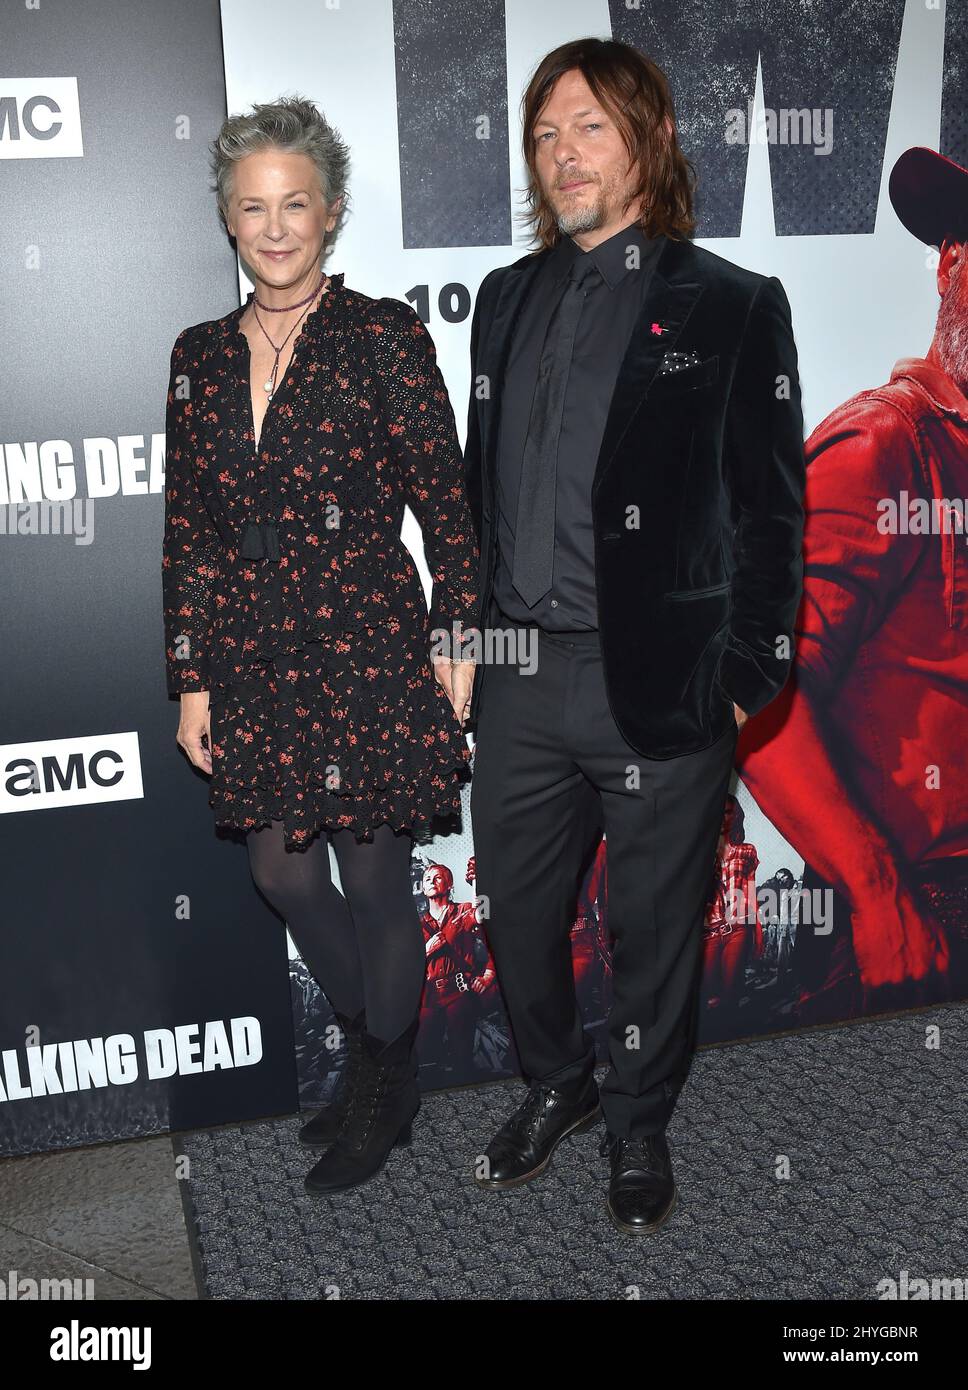 Melissa McBride and Norman Reedus arriving to the 'The Walking Dead